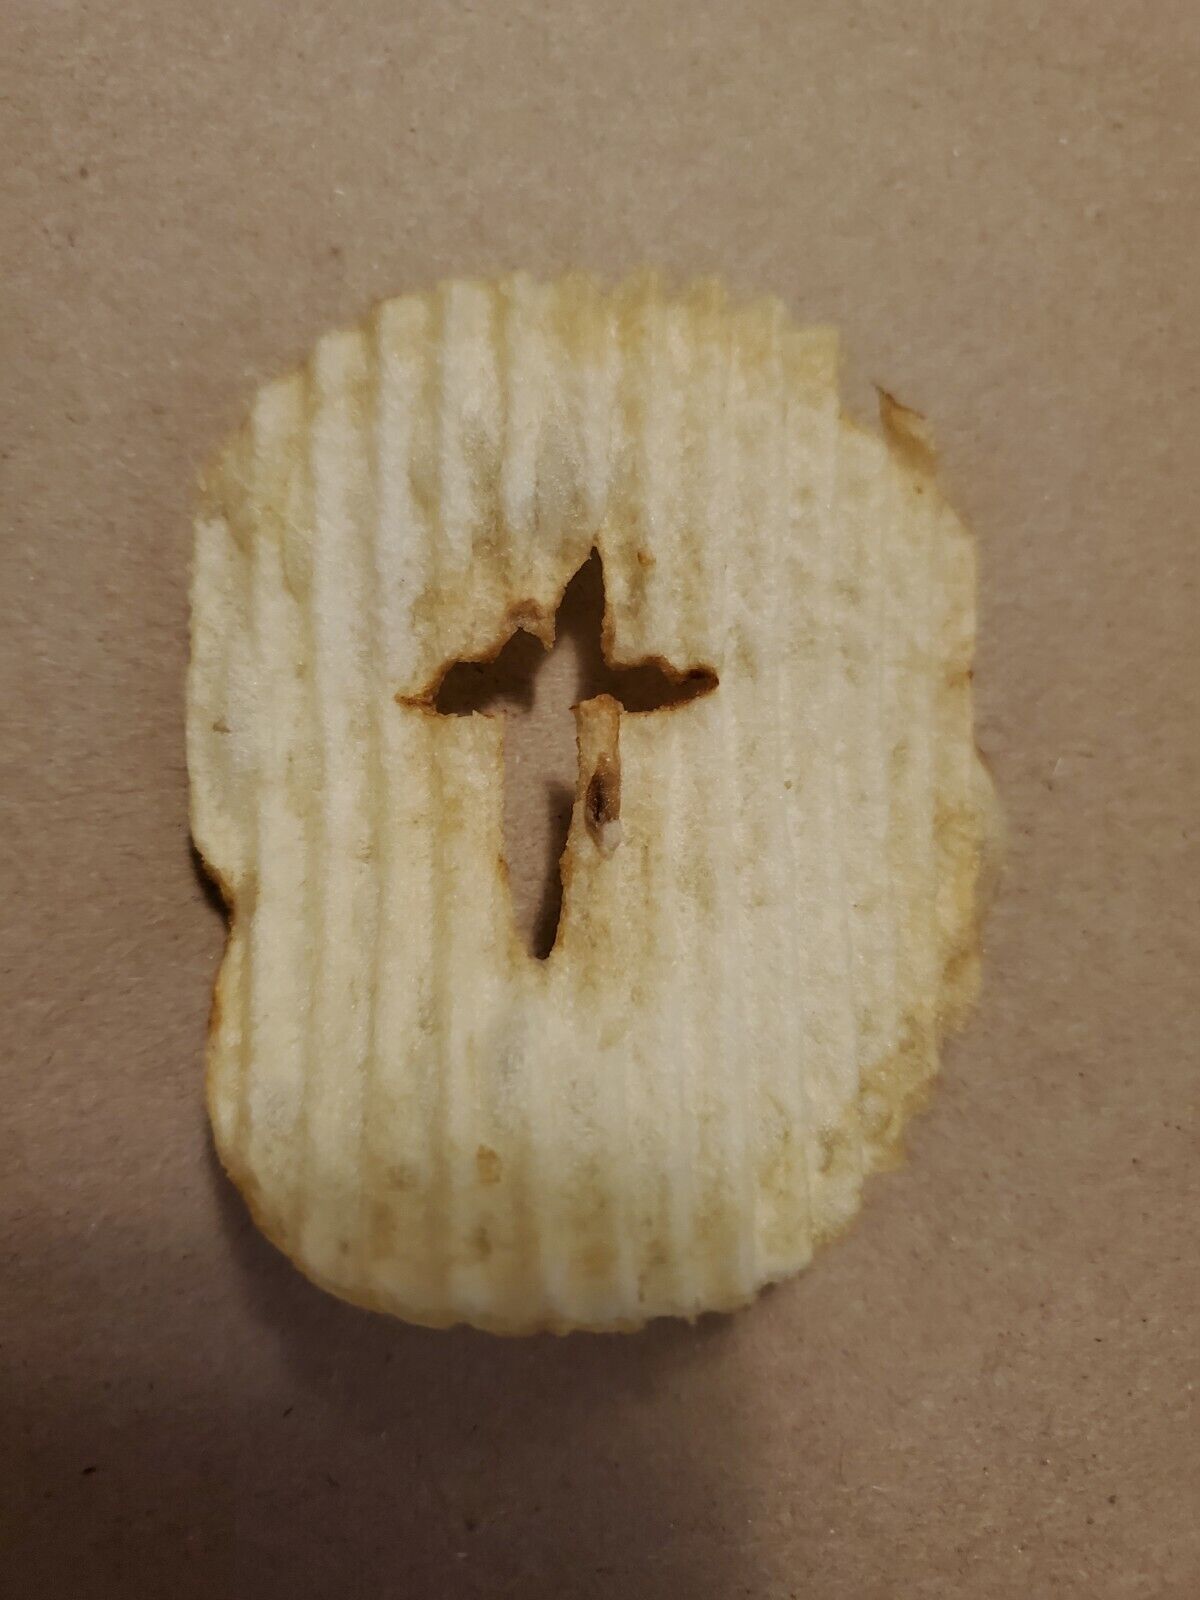 Cross in the Middle of a Potato Chip - Found in a Bag of Chips - Weird Chip